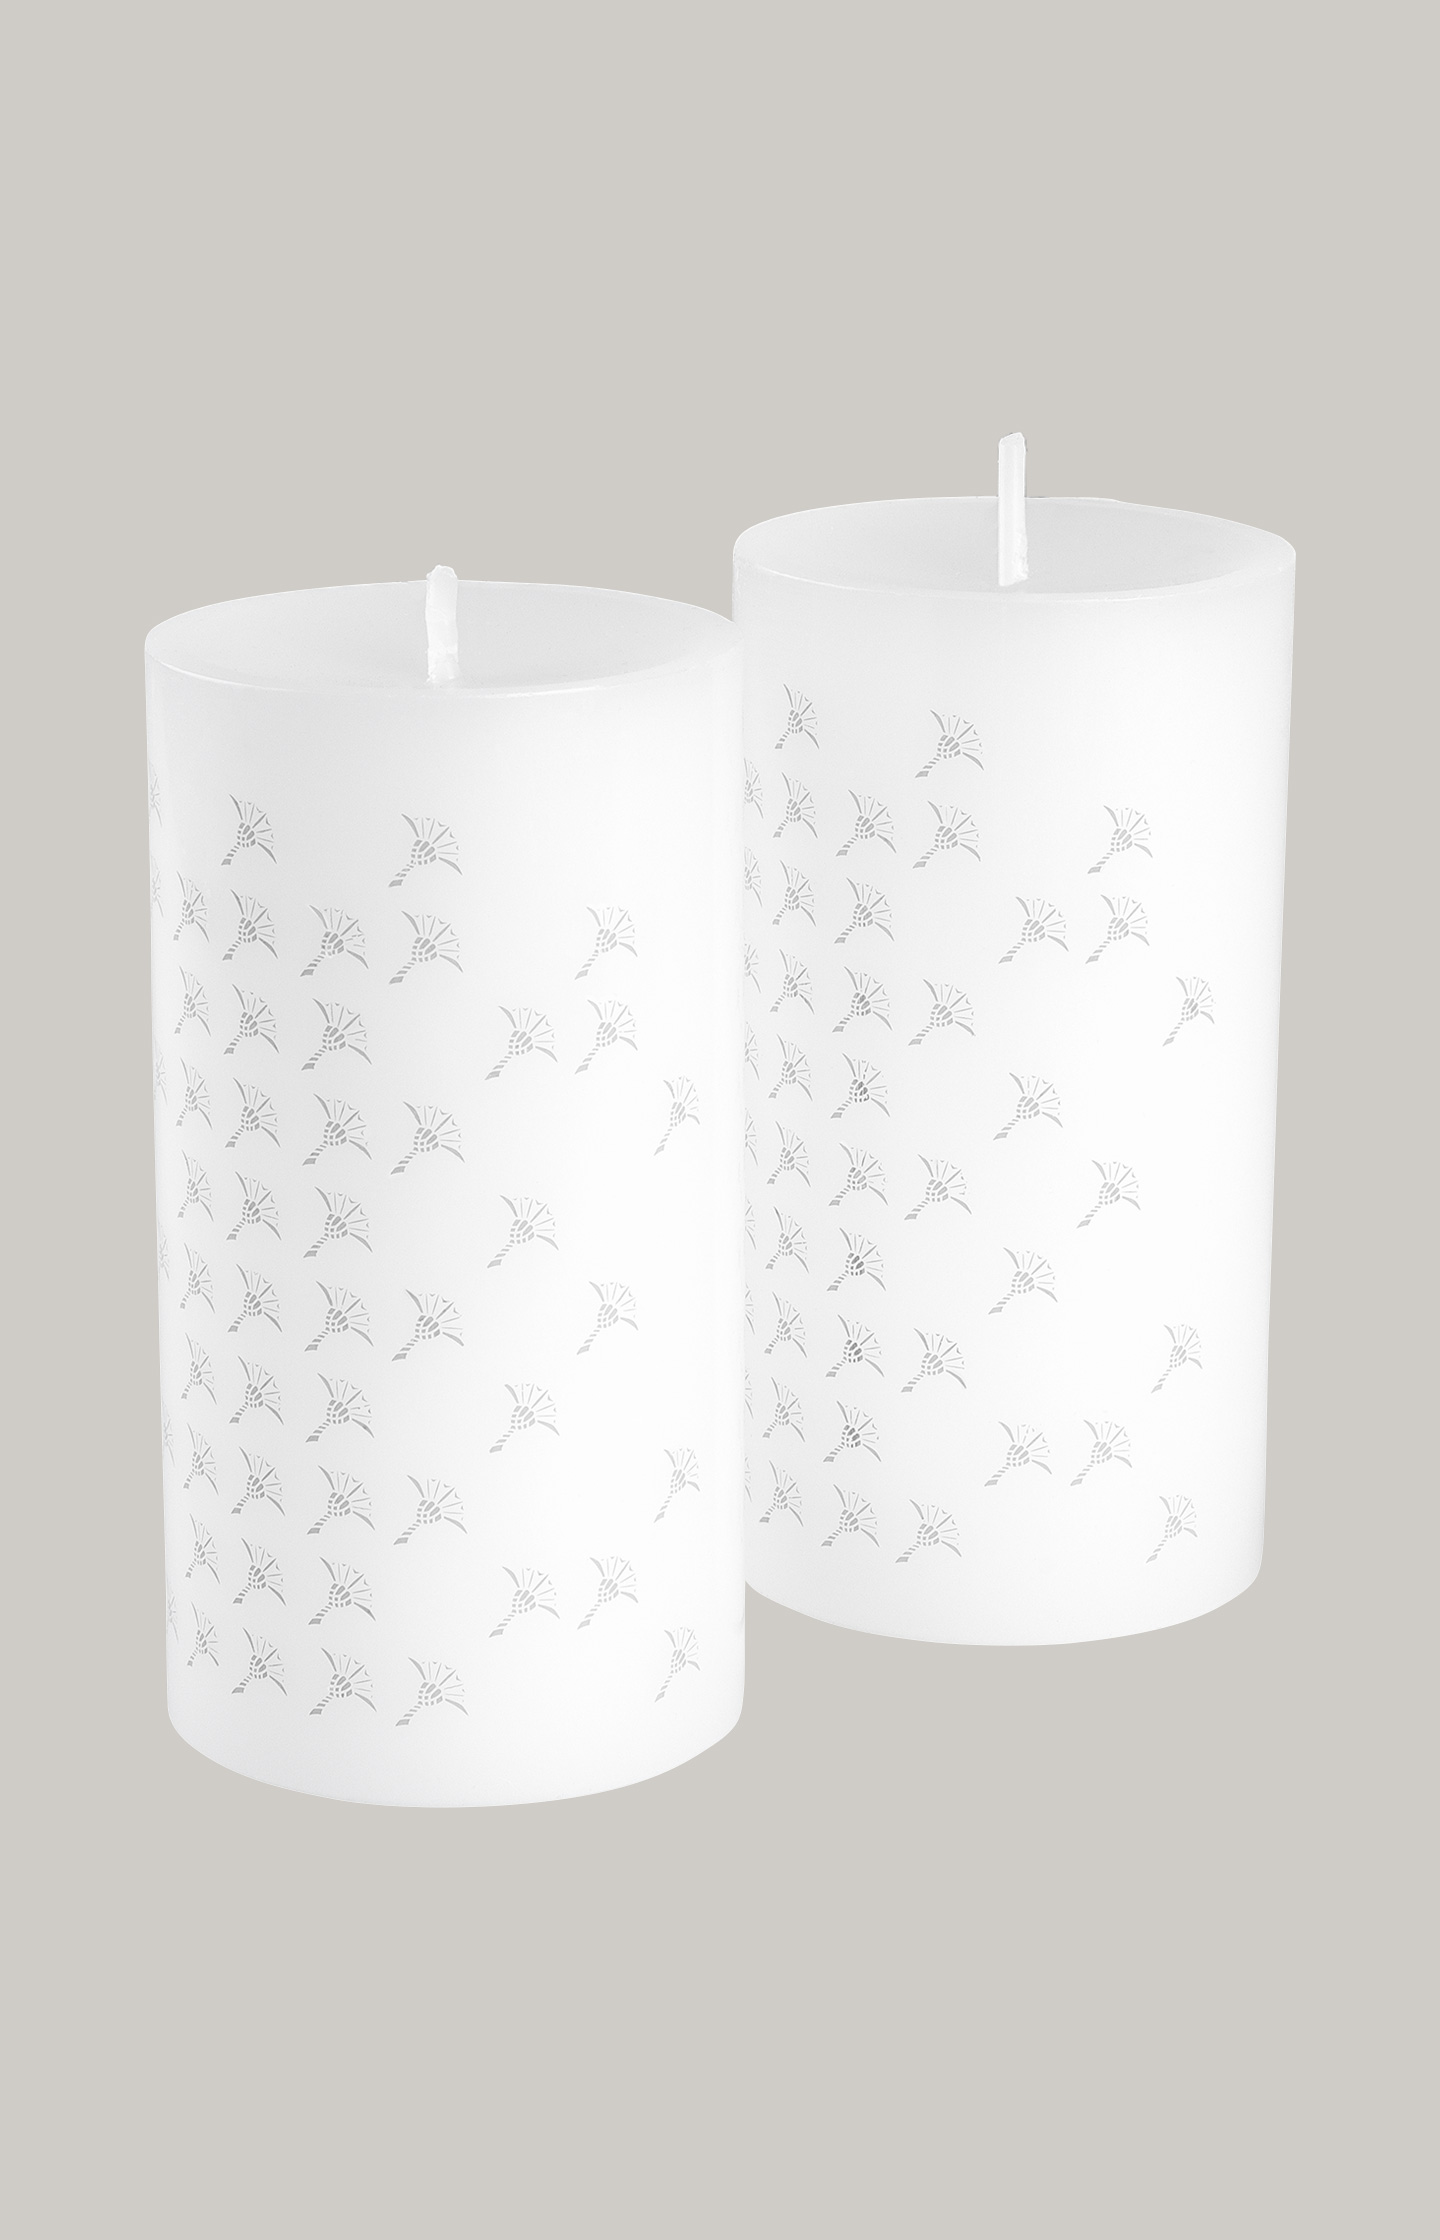 New JOOP! FADED CORNFLOWER pillar candle in white - set of 2, 15 cm tall -  in the JOOP! Online Shop